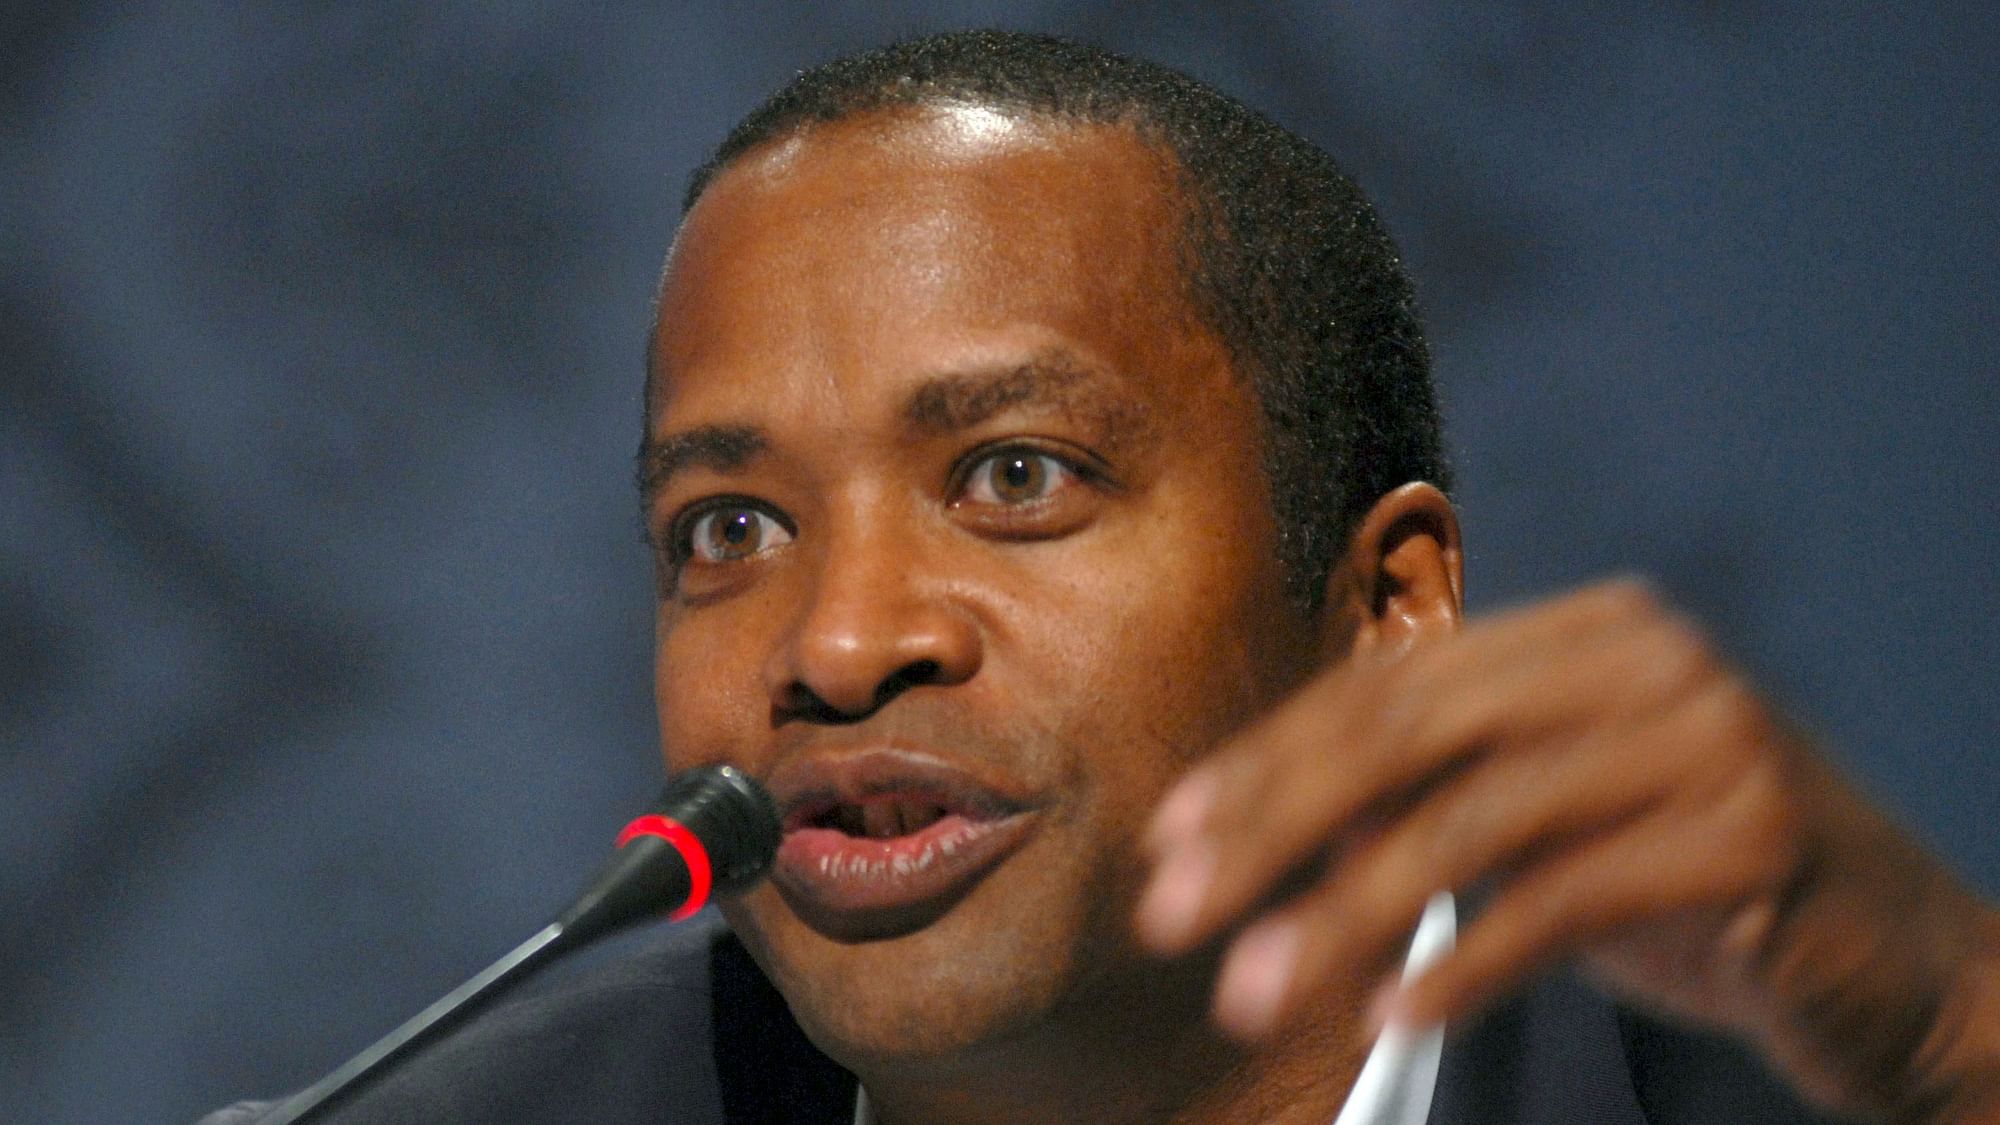 File image of David Drummond, Senior Vice President and Chief Legal officer of Google.